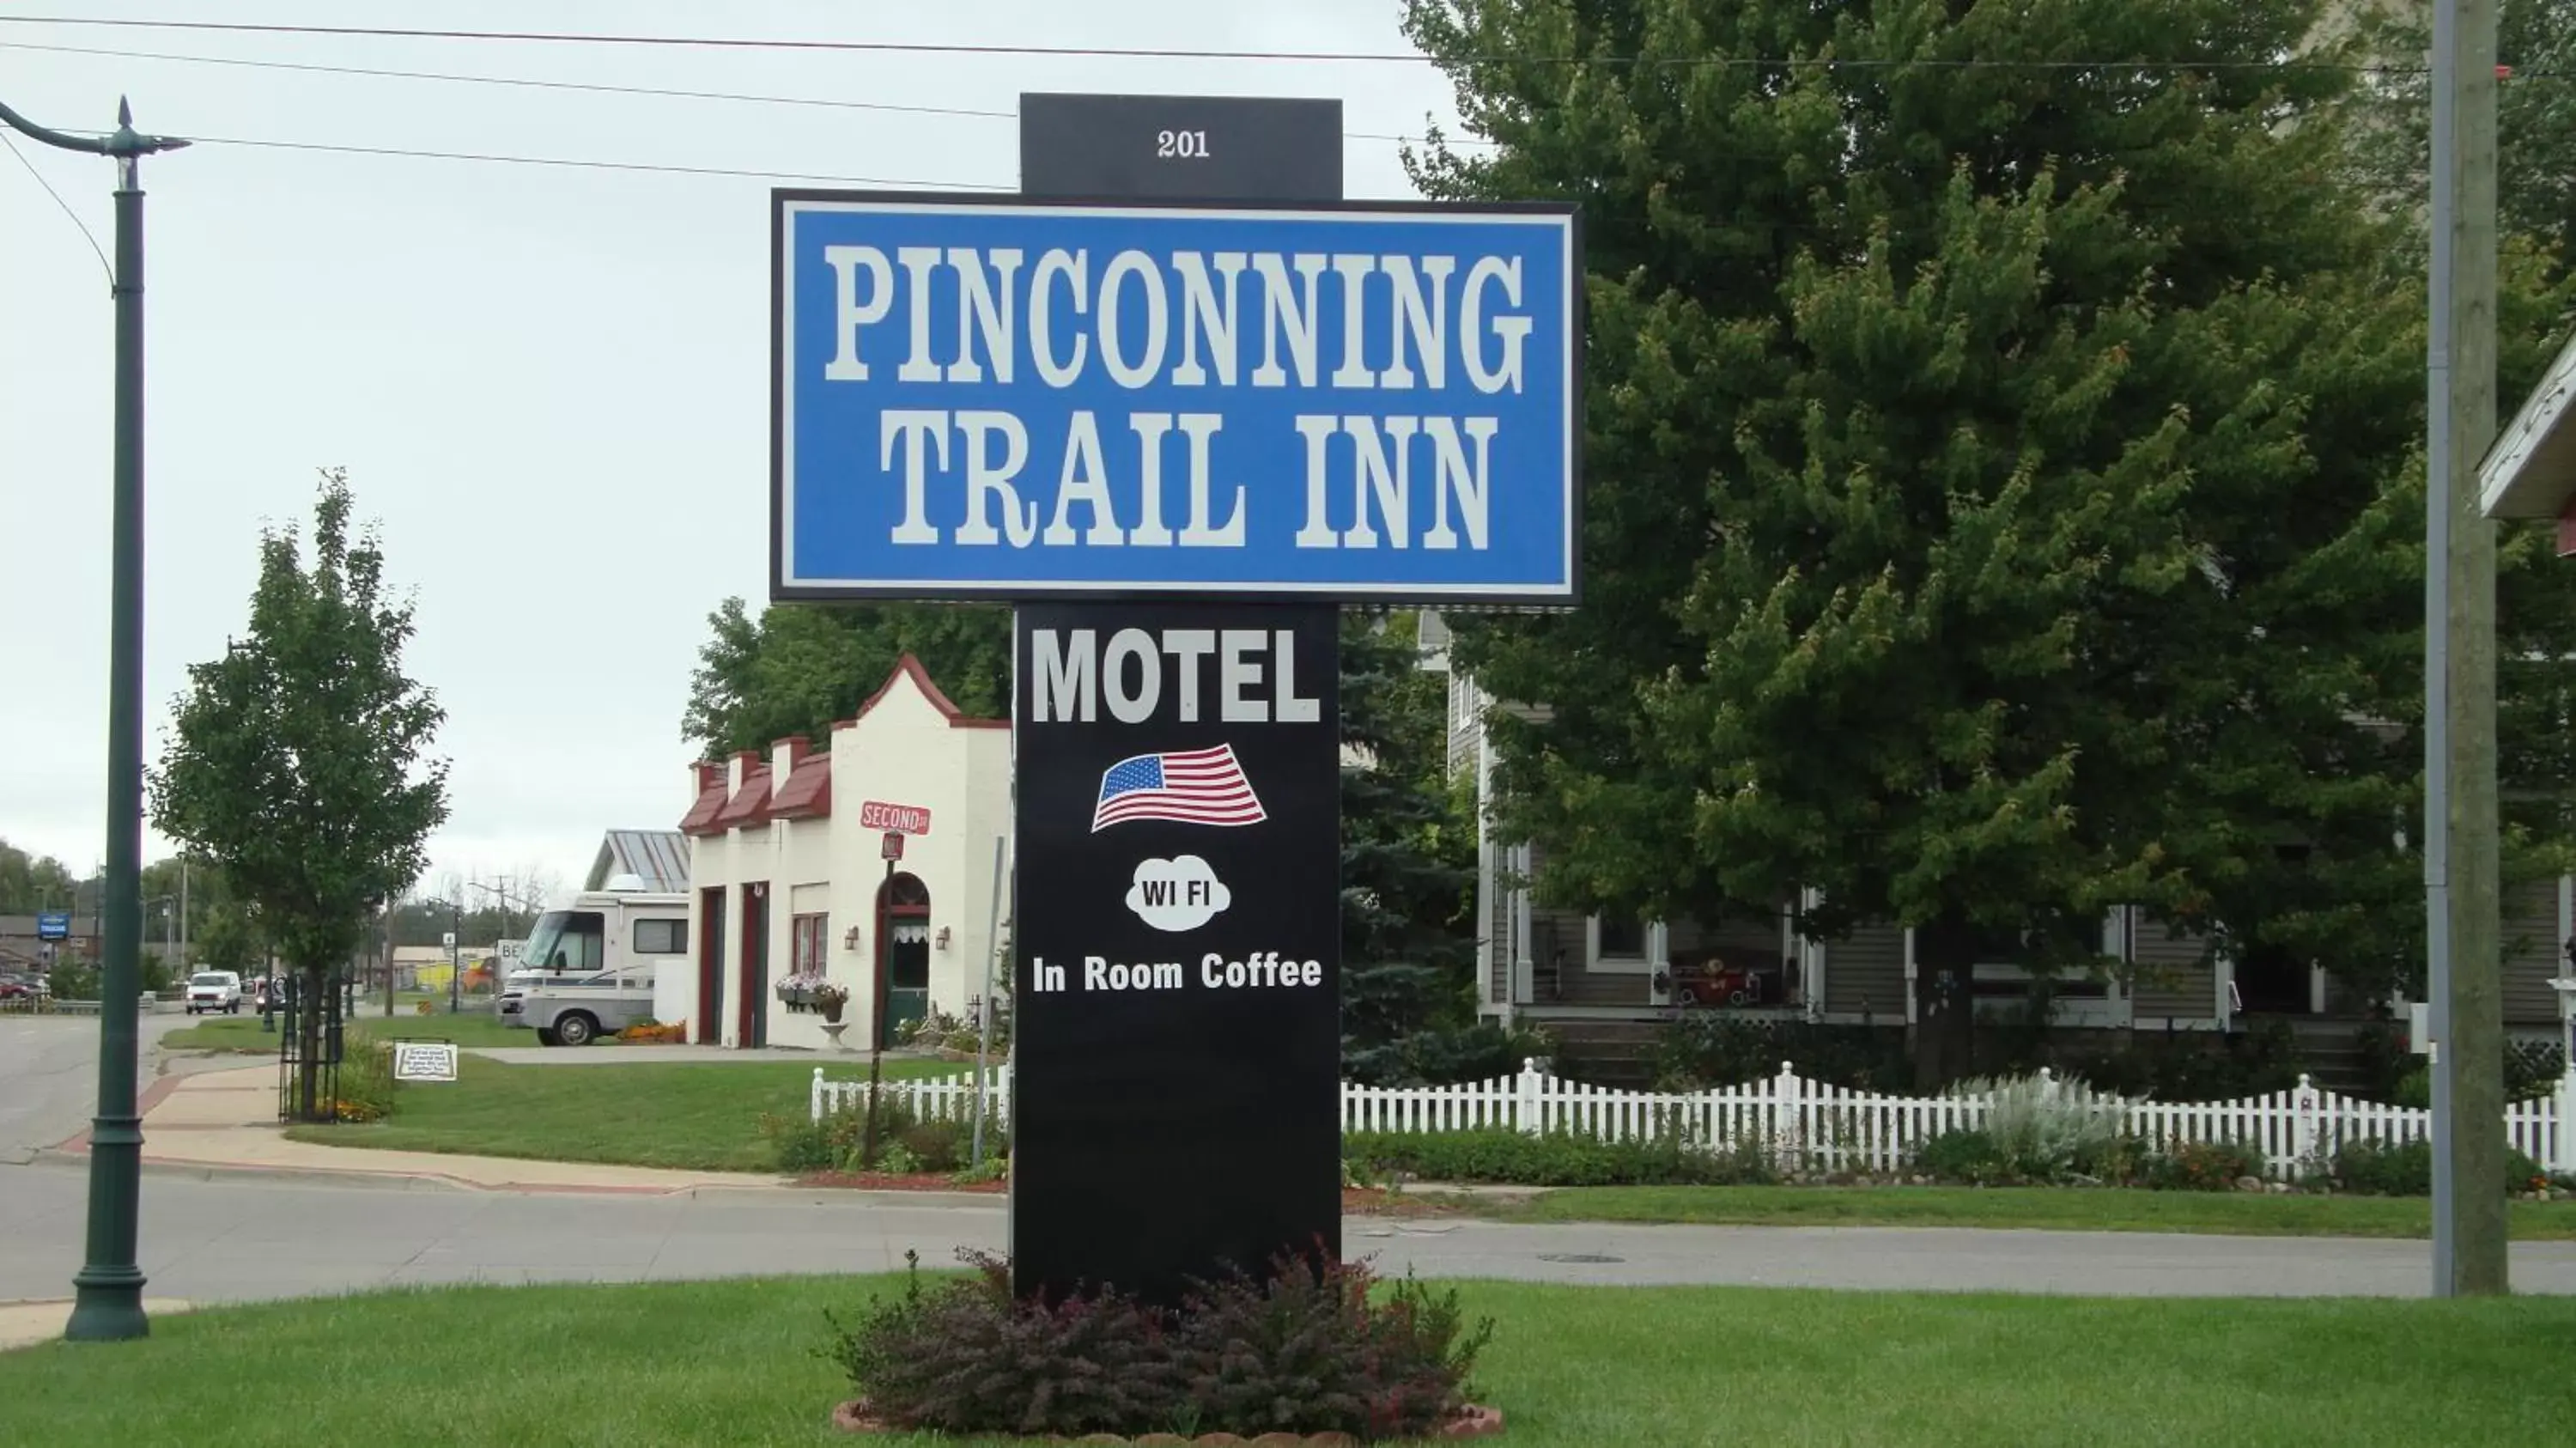 Property logo or sign in Pinconning Trail Inn Motel